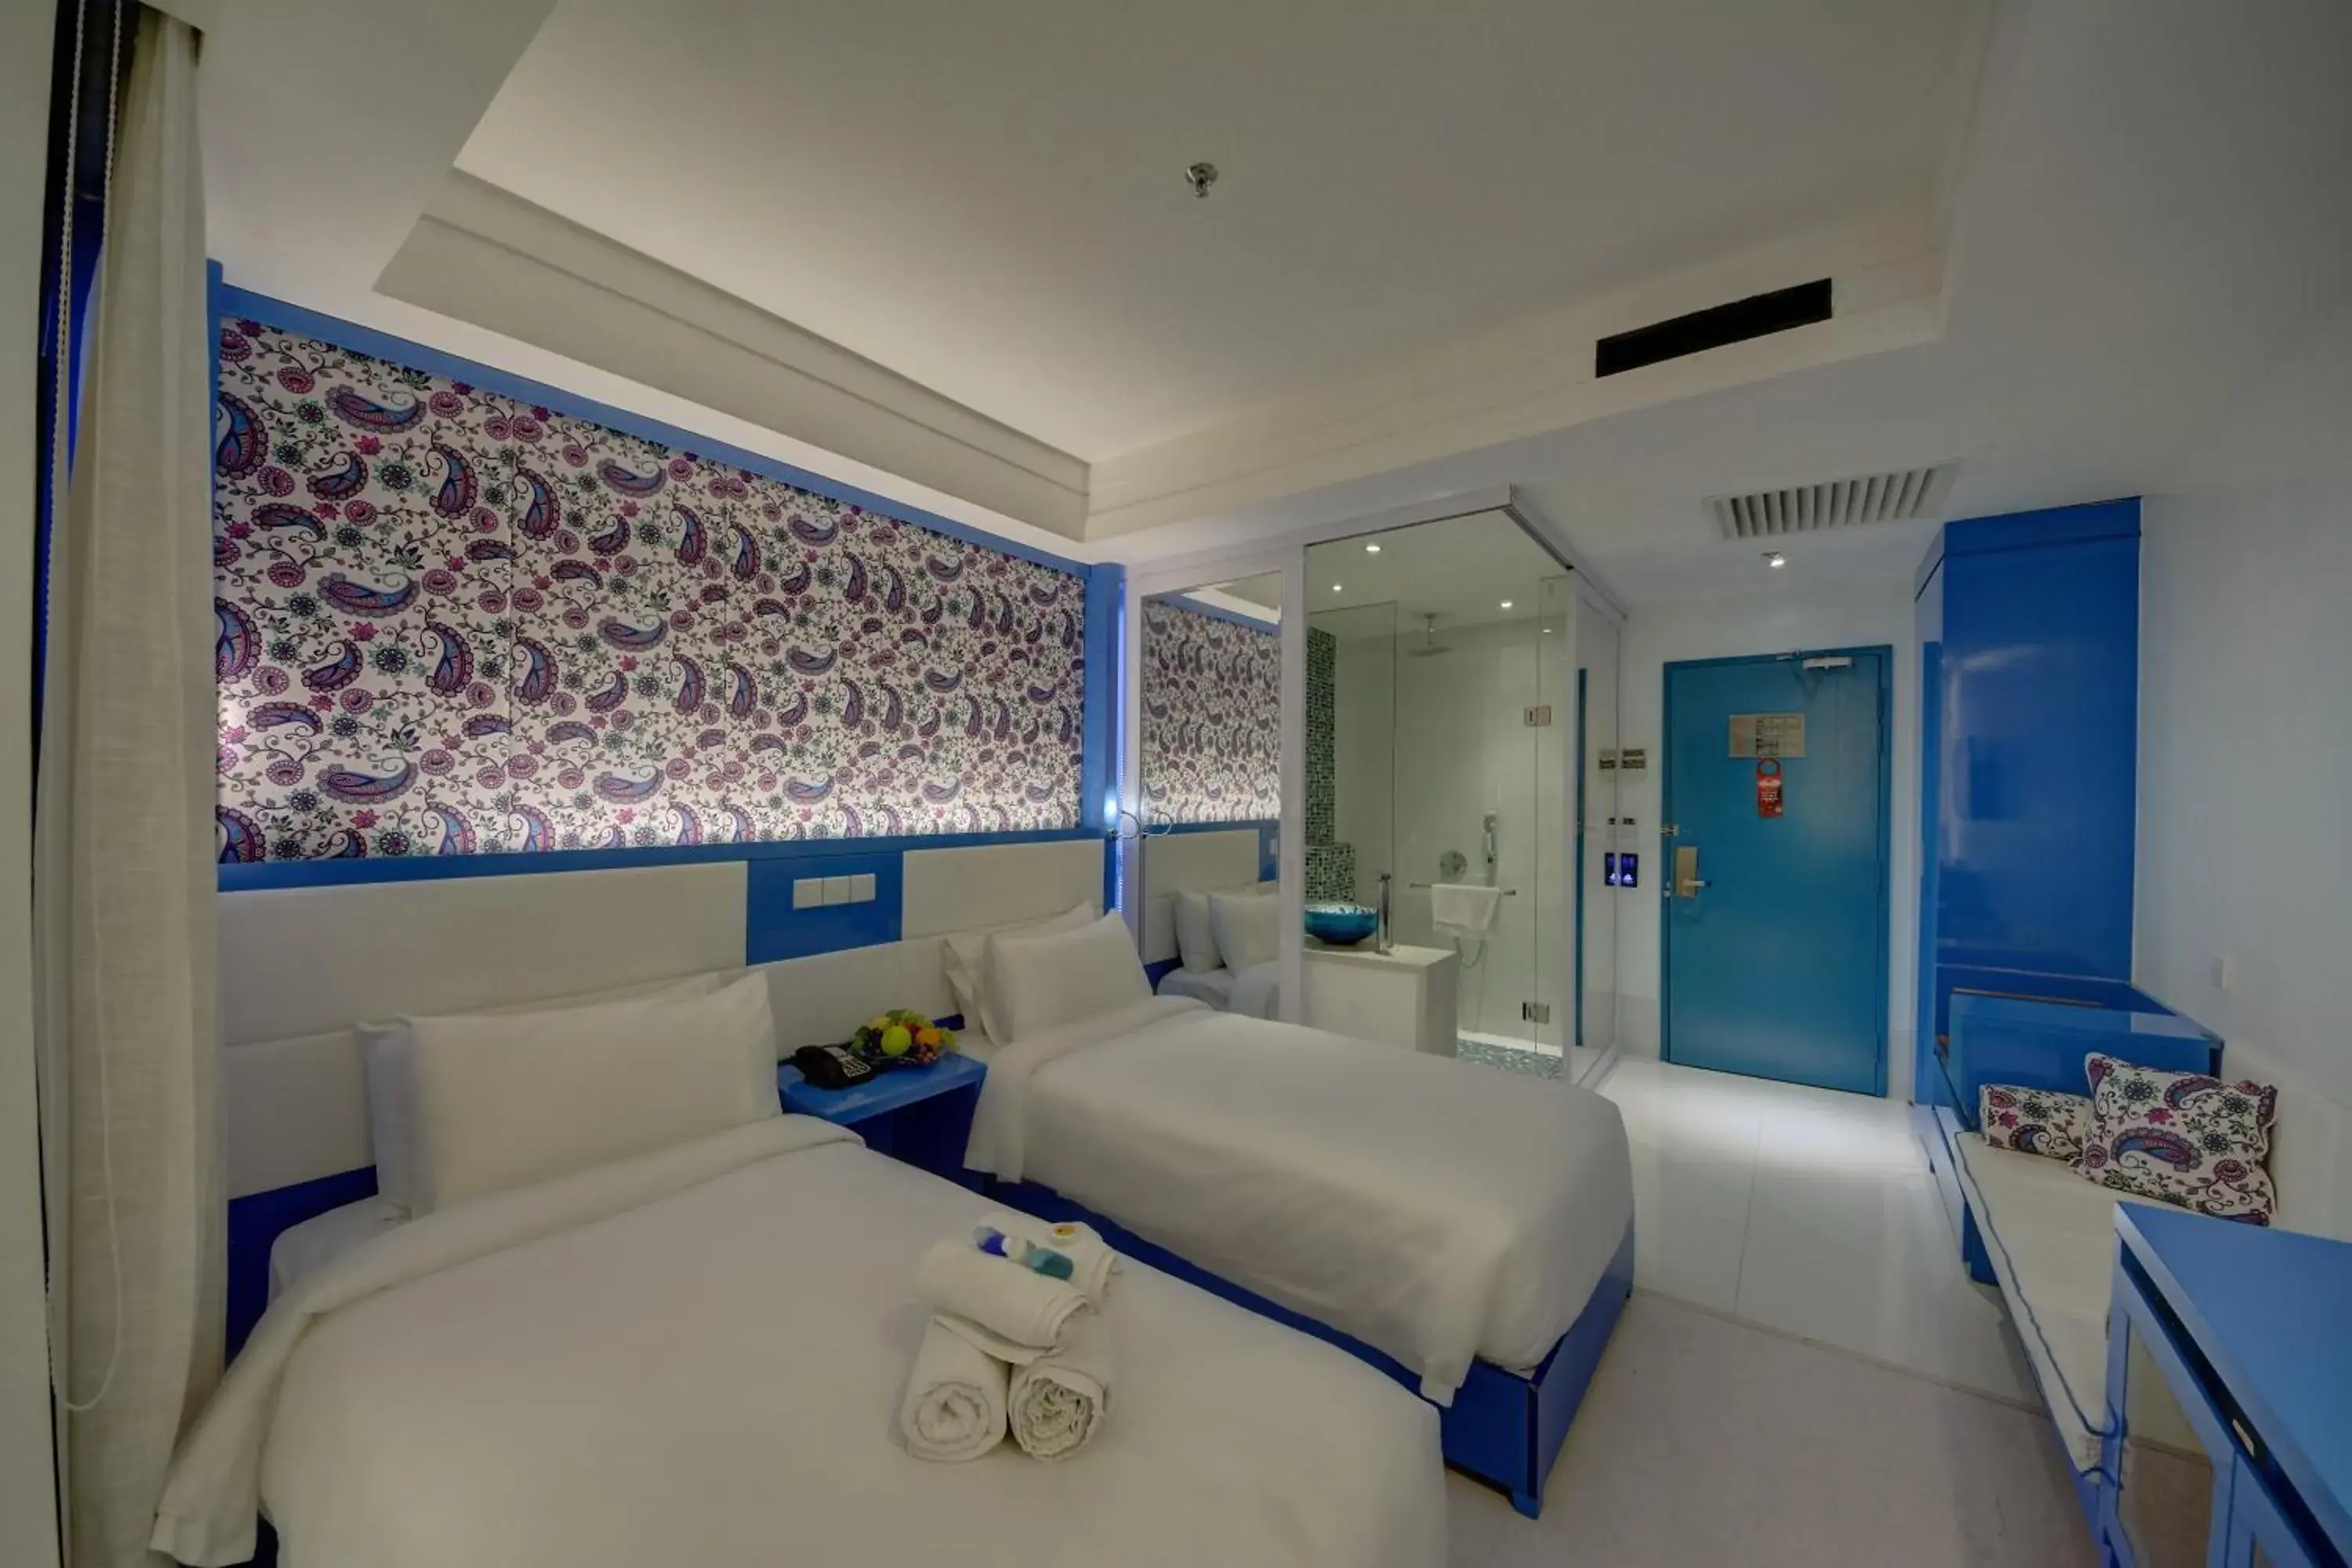 Annex Superior Twin Room - No Window (nonsmoking room)  in Arenaa Star Hotel